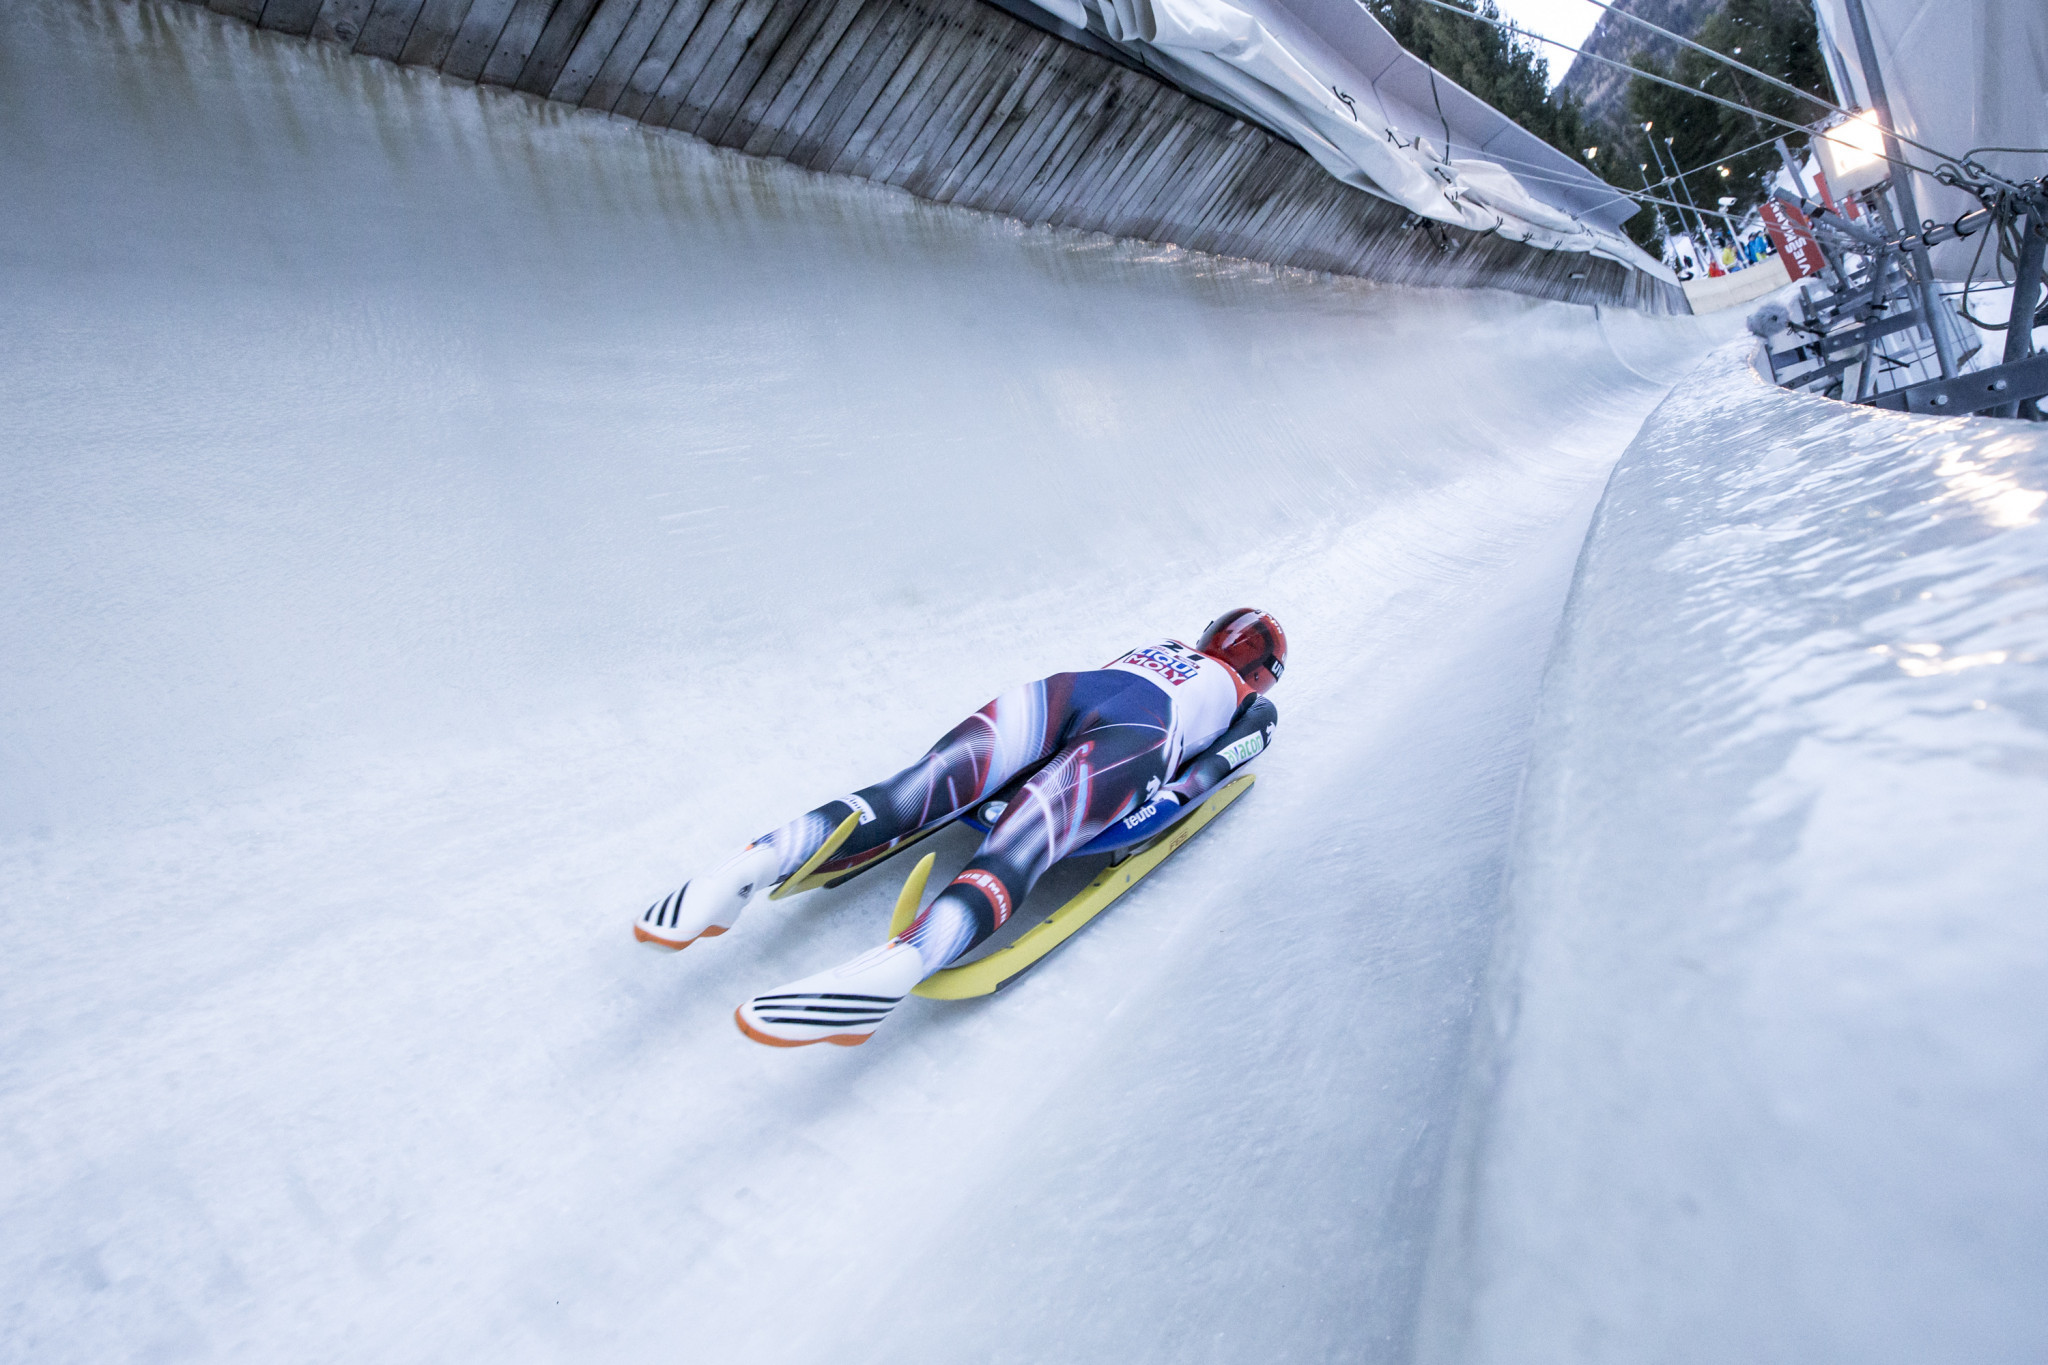 Germany's Taubitz beats team-mate to win first Luge World Cup race in Calgary